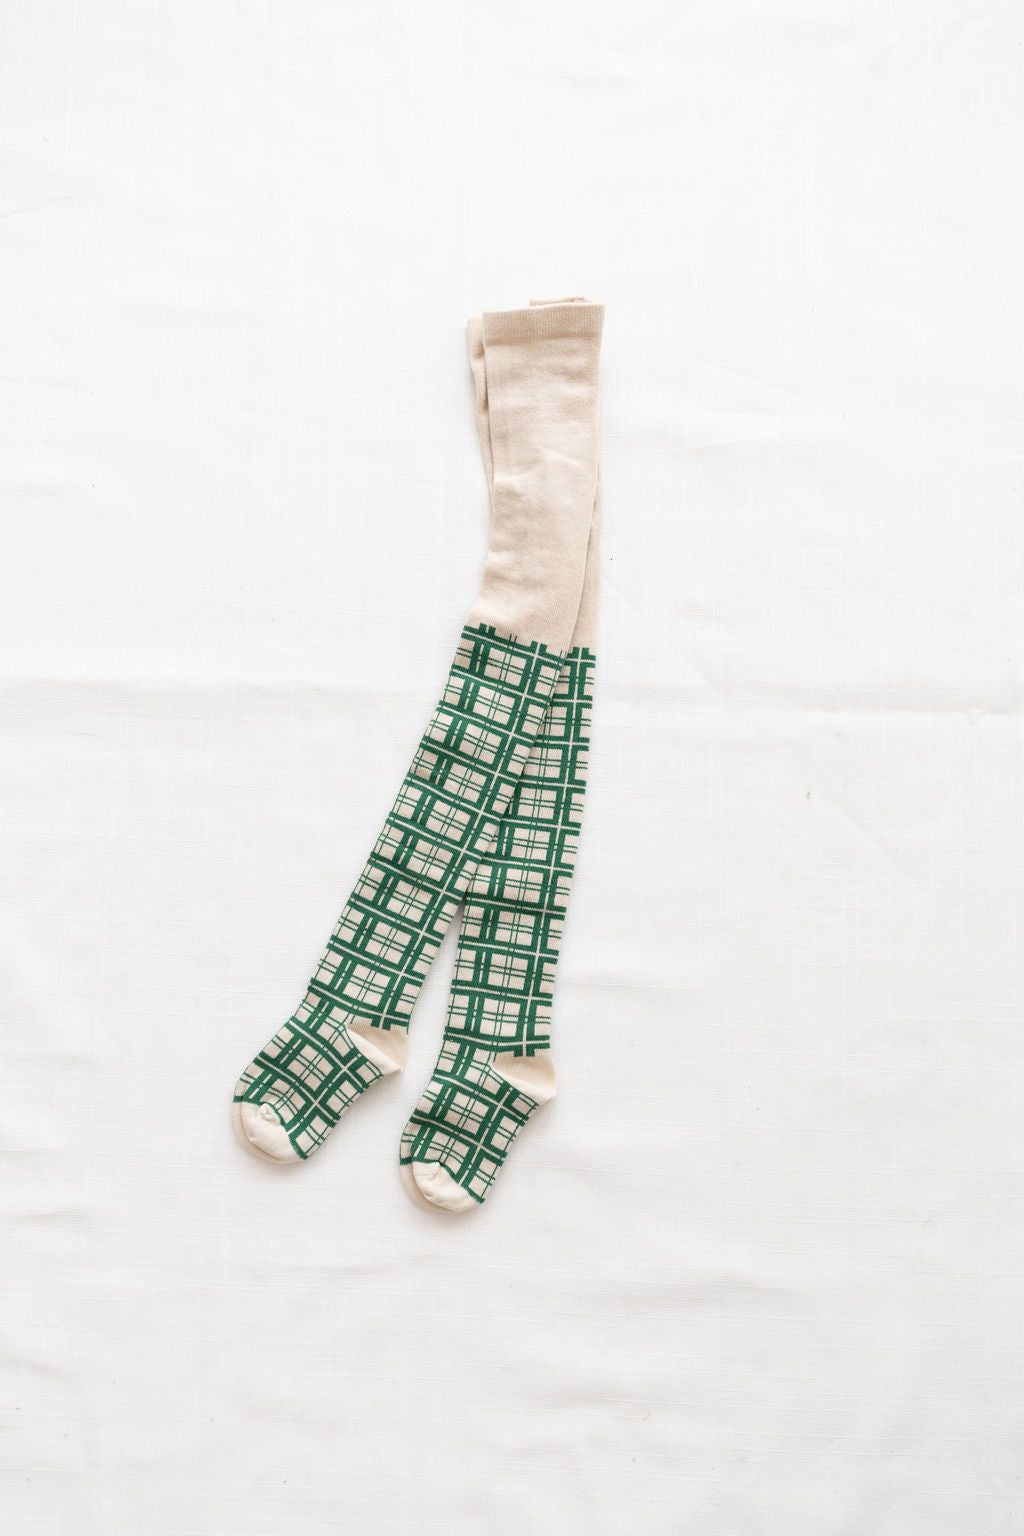 Fin & Vince French Plaid Tights, Fern